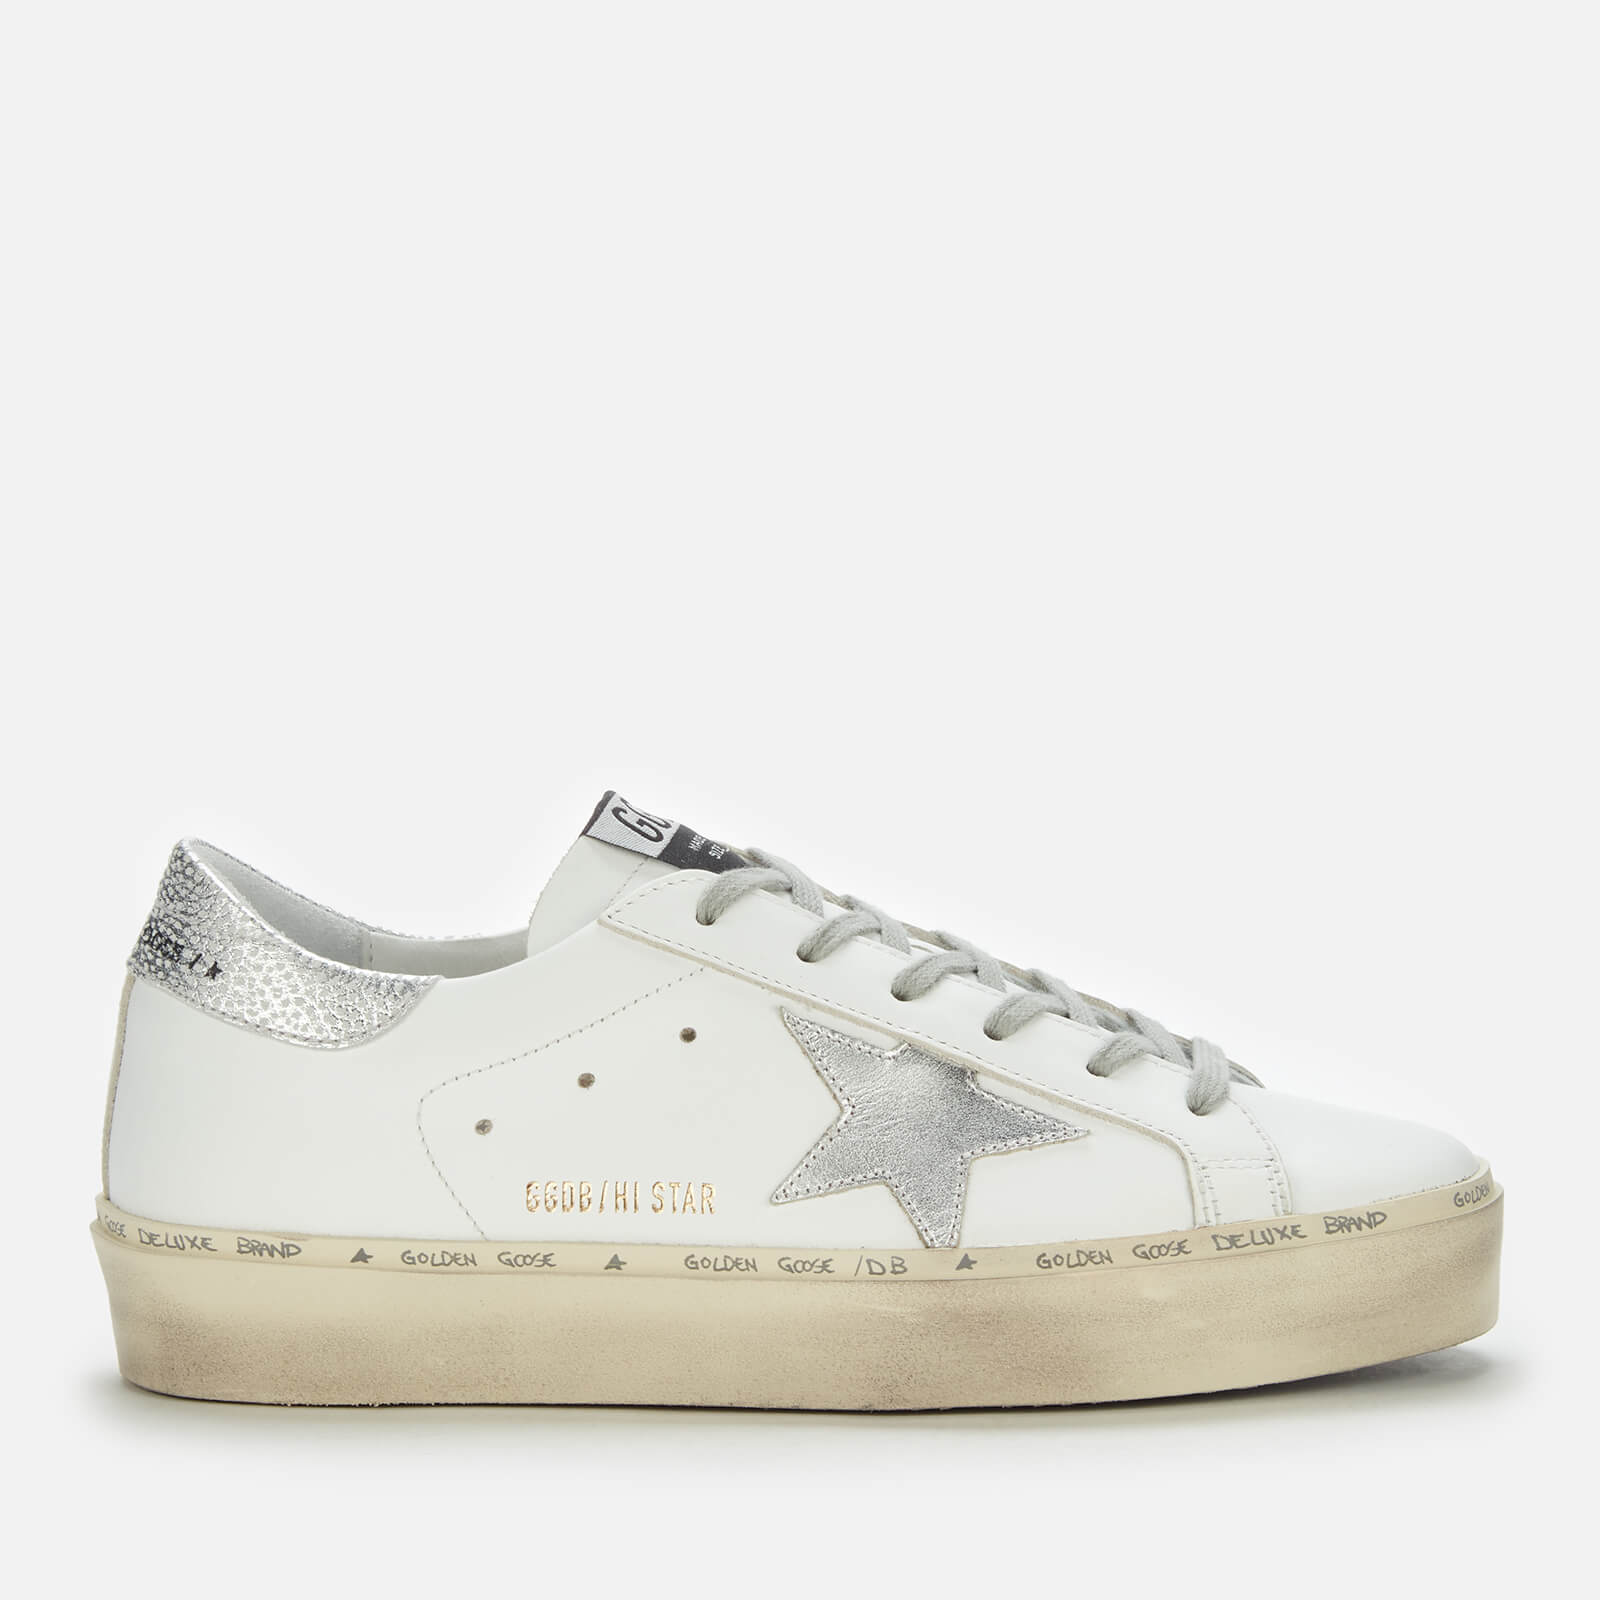 Golden Goose Women's Hi-Star Leather Flatform Trainers - White/Silver ...